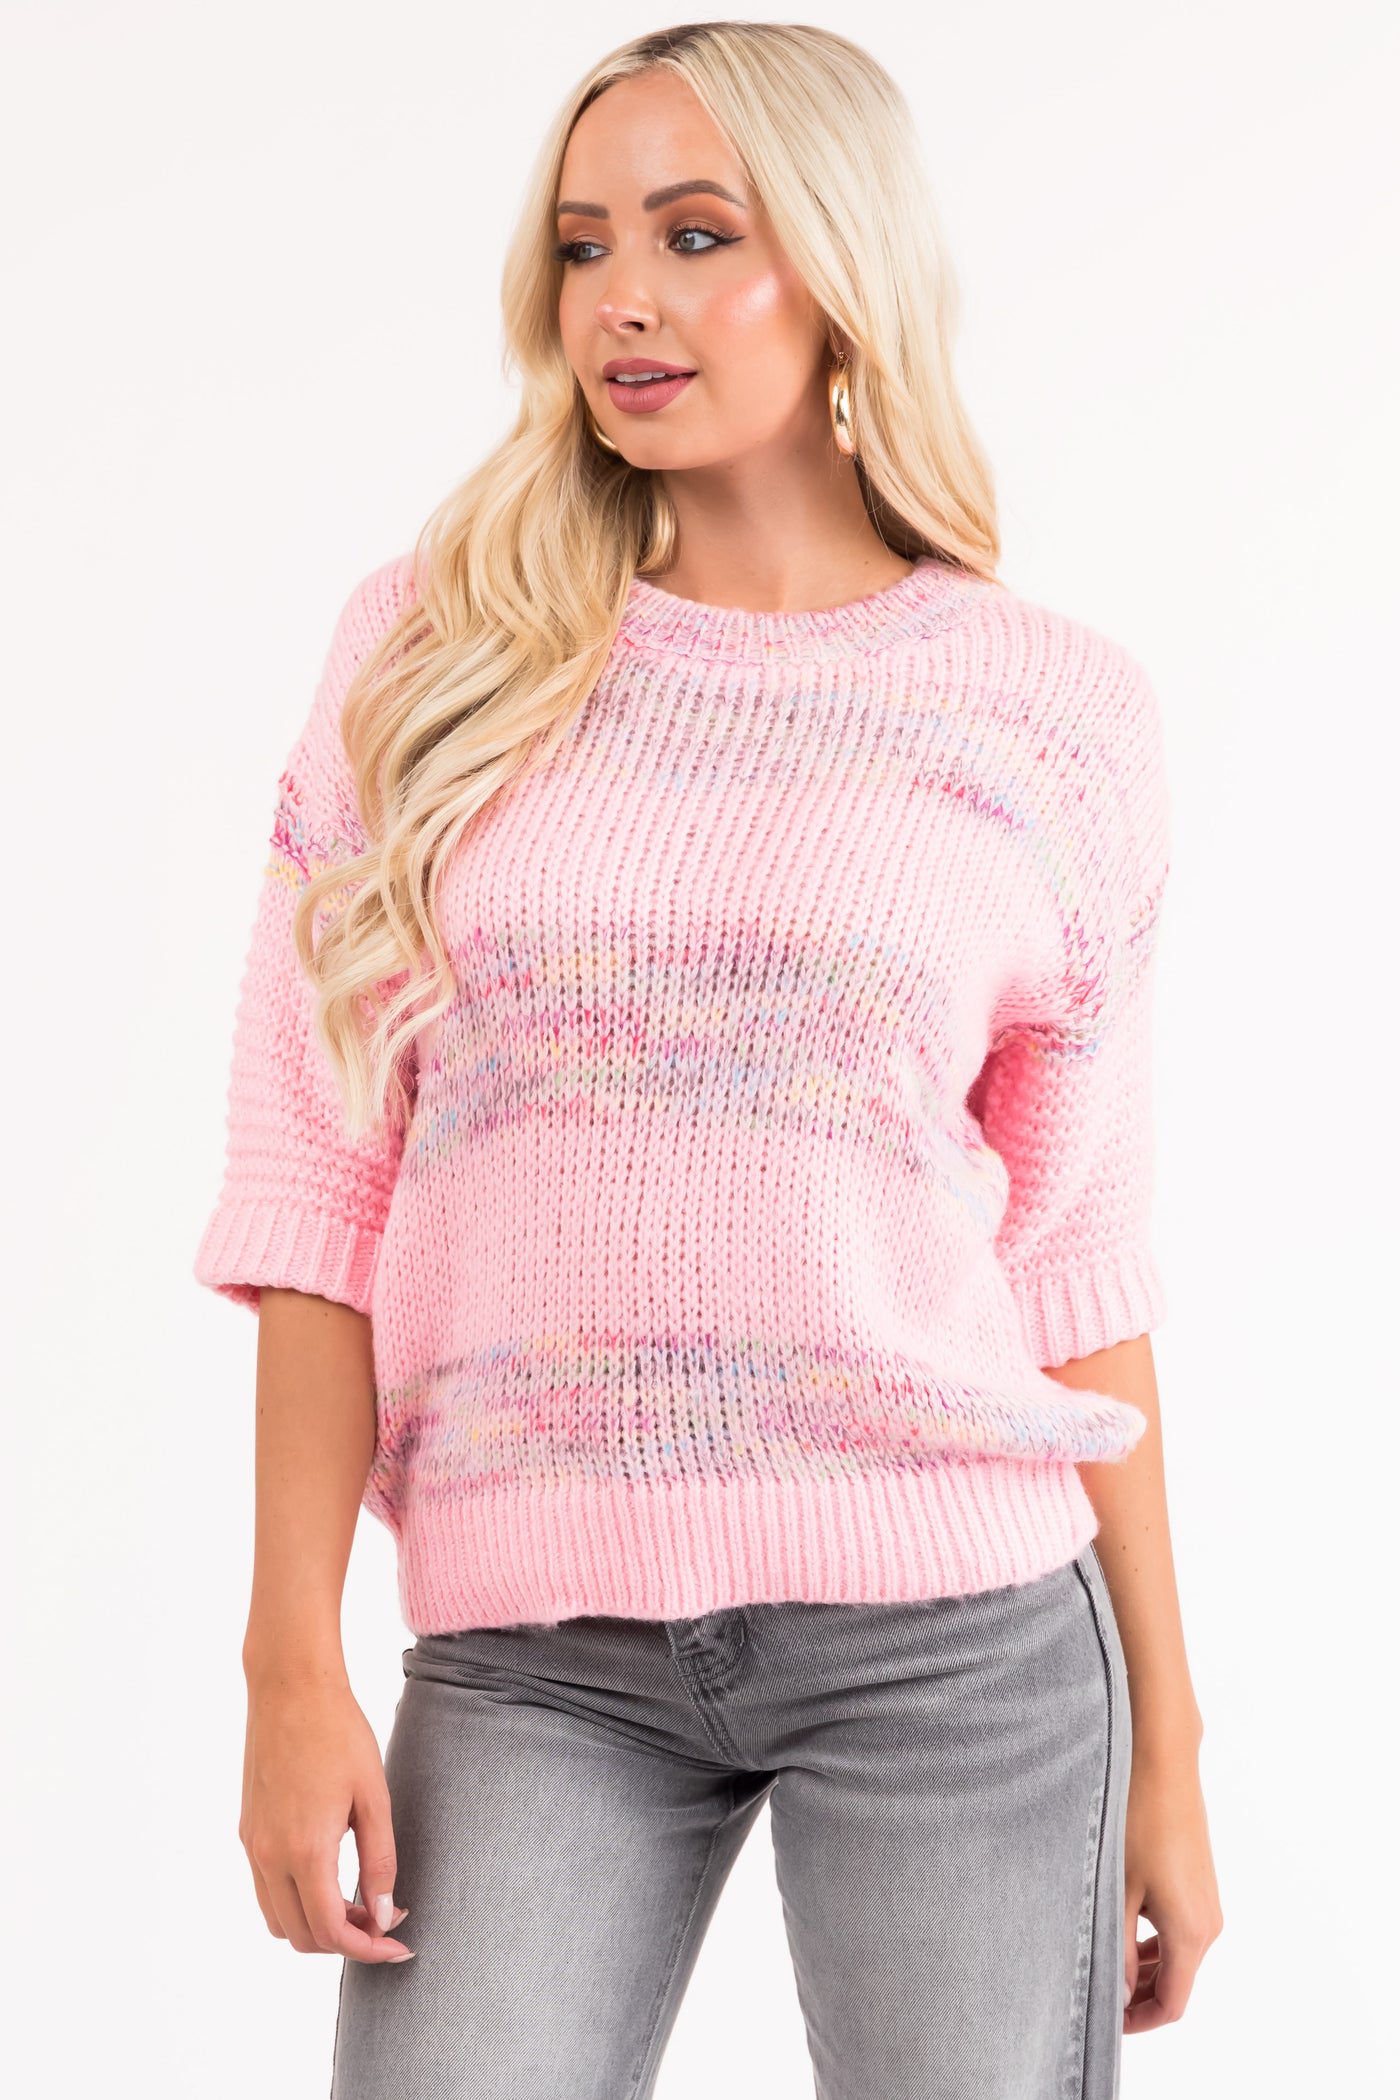 Baby Pink Colorful Stripe Half Sleeve Sweater